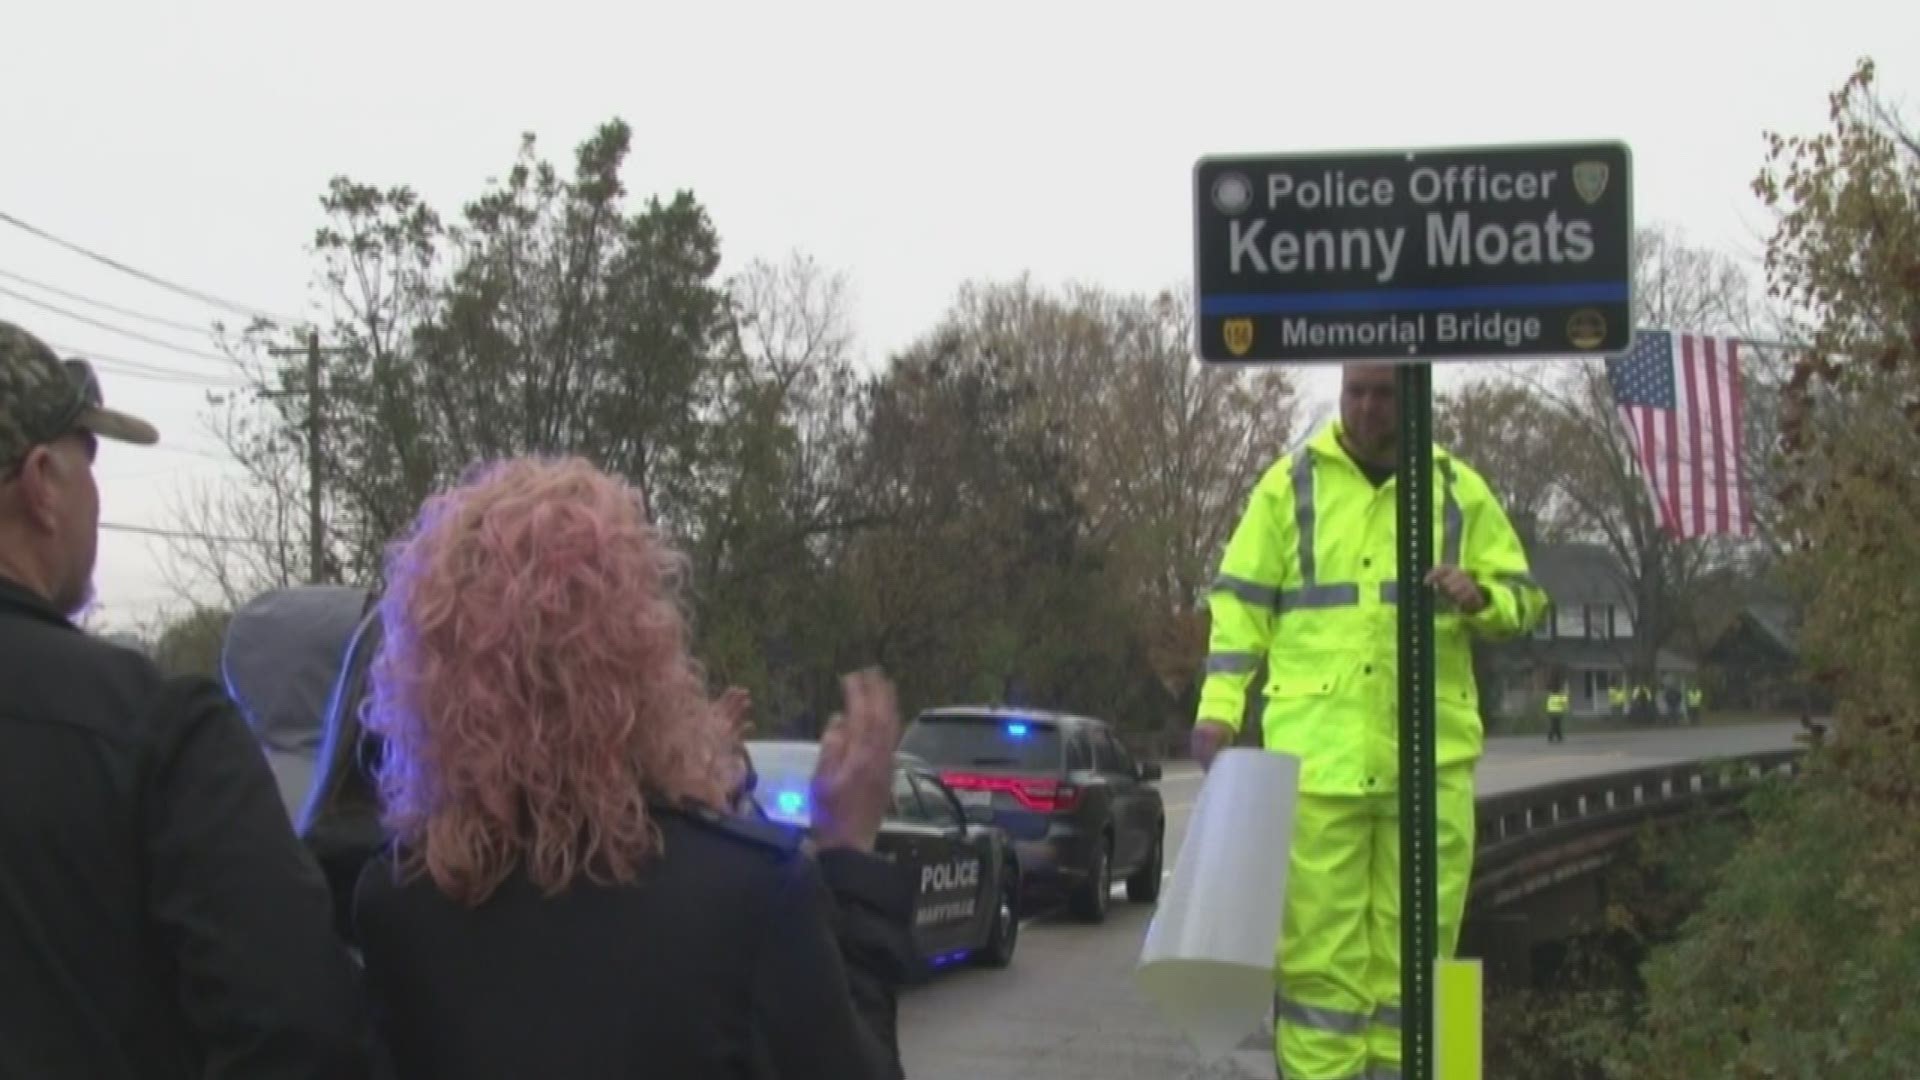 The community came together today to honor fallen Maryville police officer Kenny Moats.